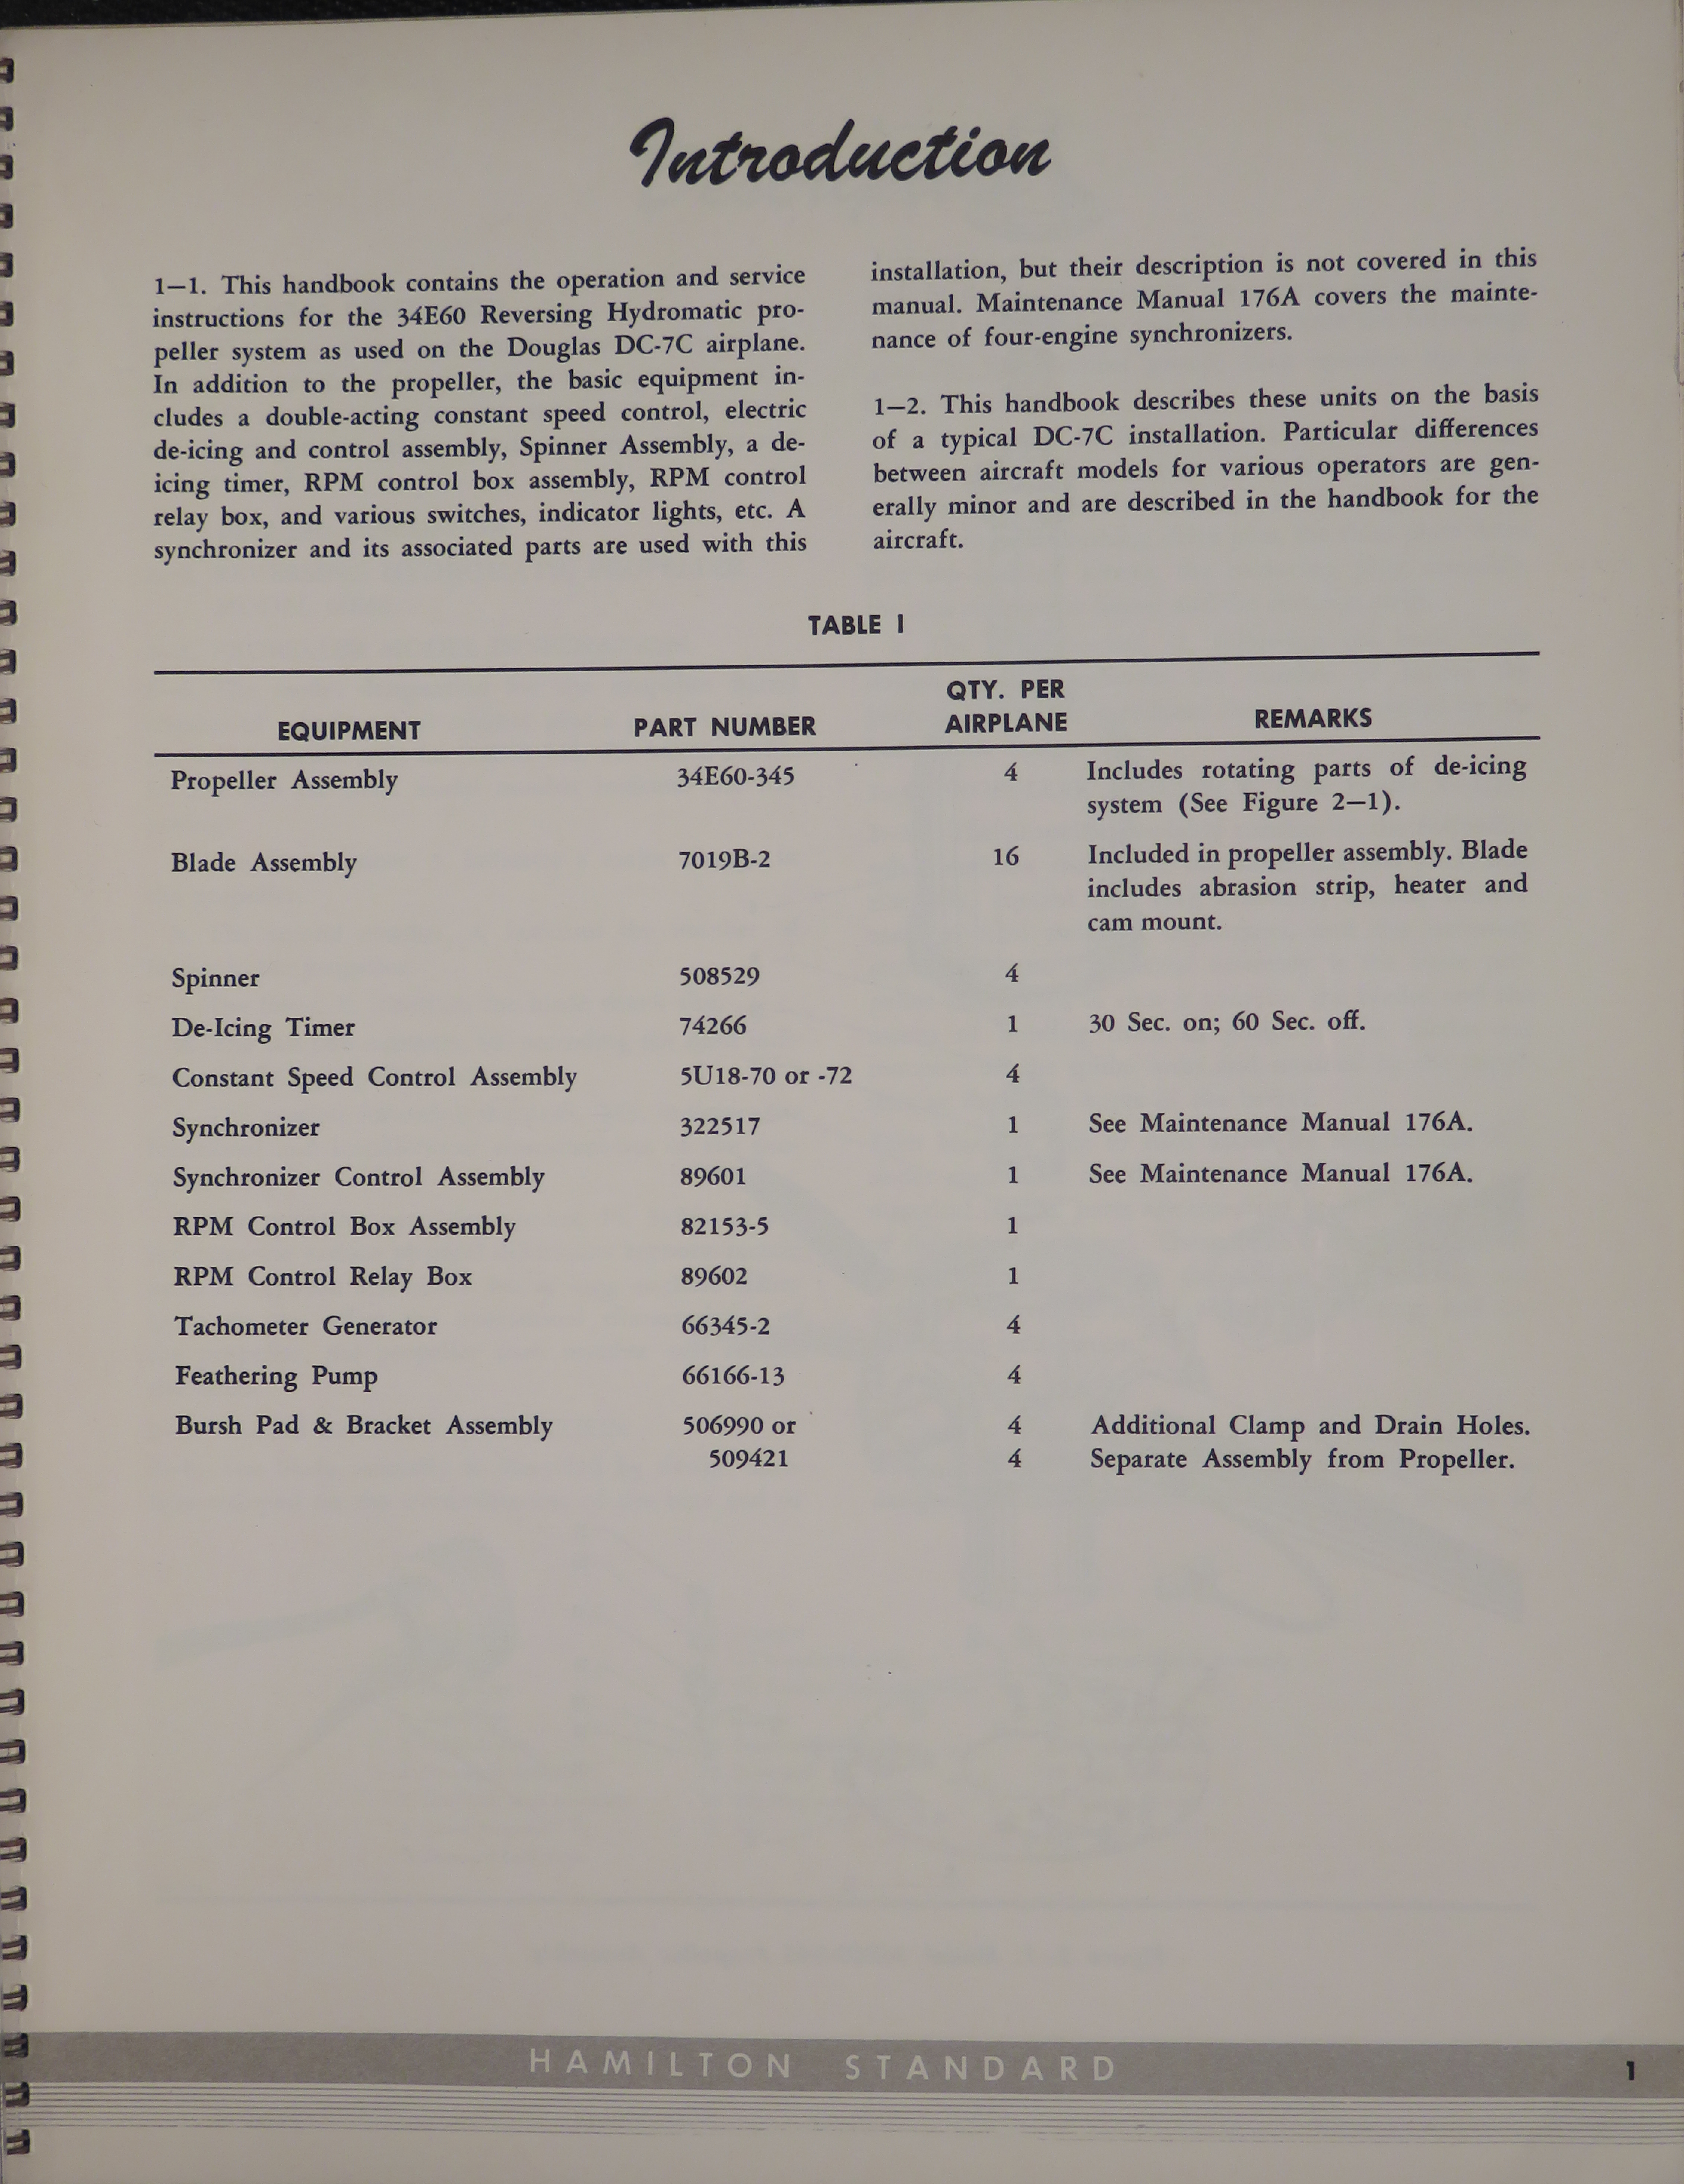 Sample page 7 from AirCorps Library document: Maintenance Manual for Hydromatic Propeller Model 34E60 for Douglas DC-7C 